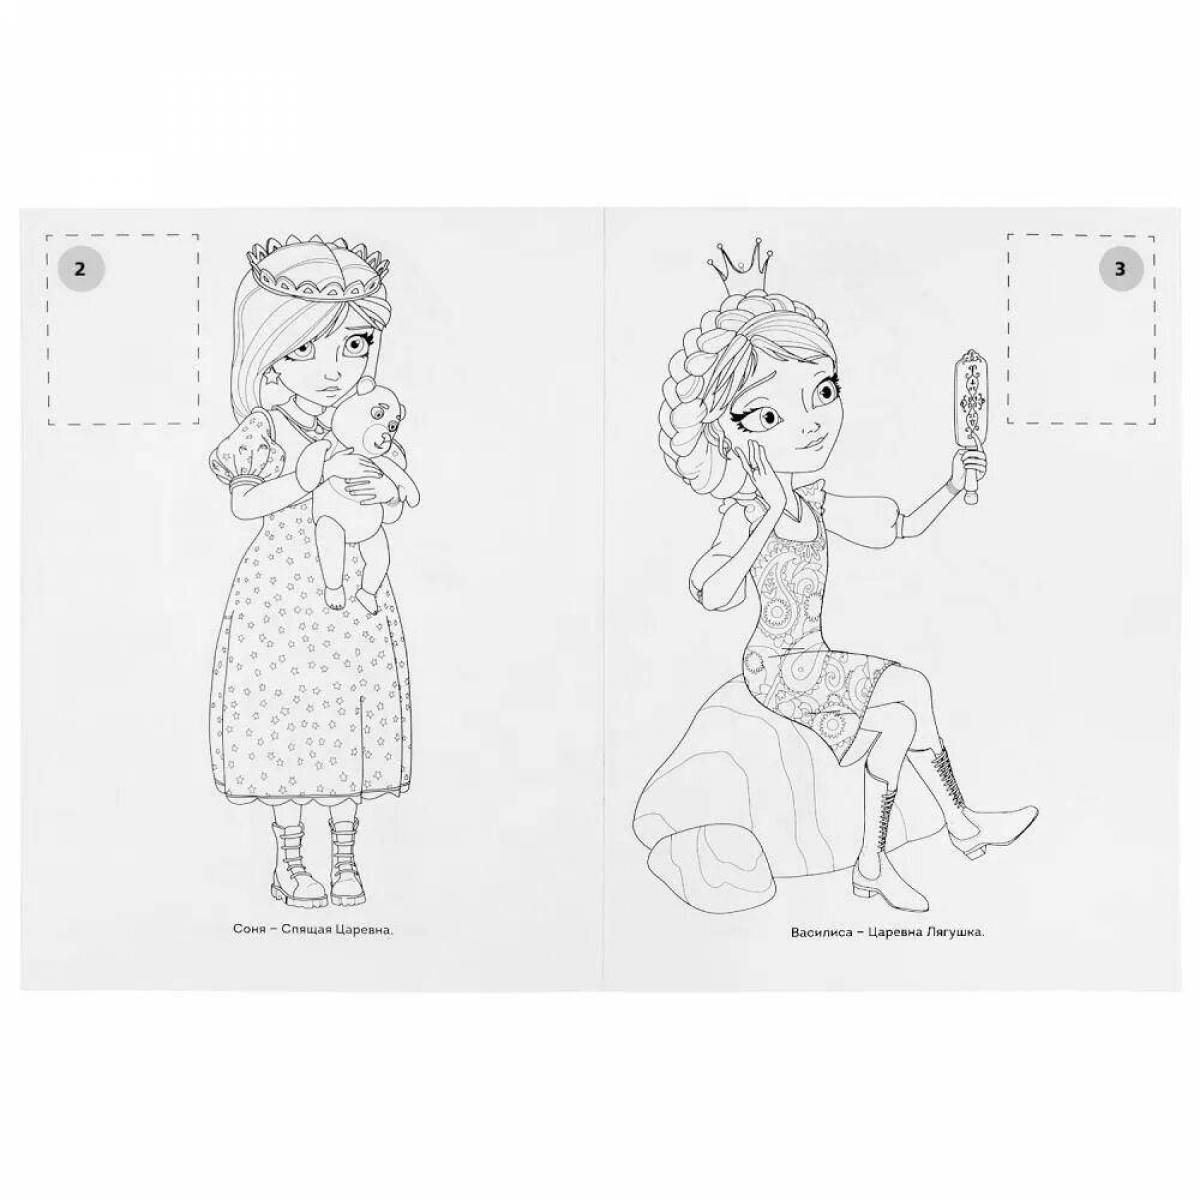 Fashion princesses are preparing coloring pages